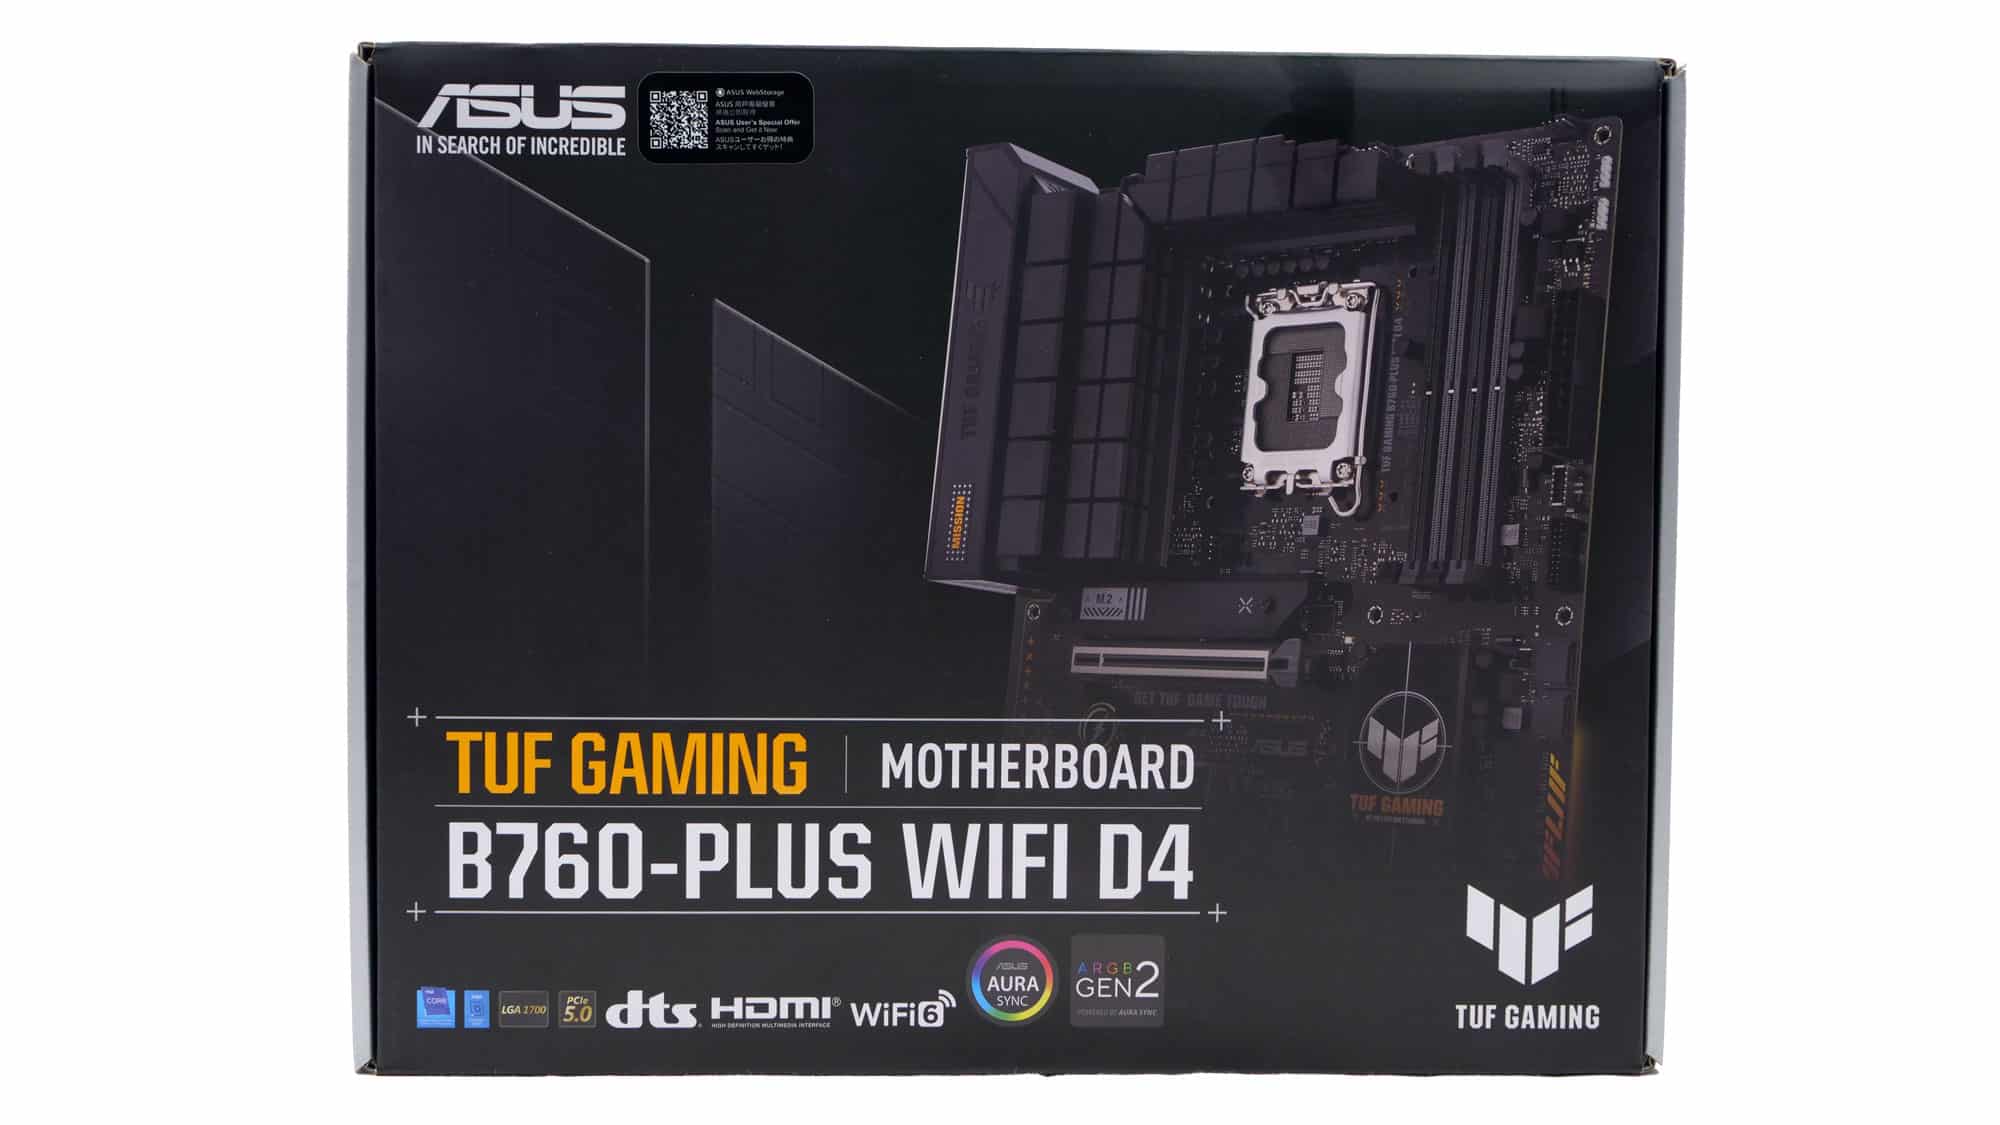 Asus TUF Gaming B760-PLUS WIFI D4 Mainboard Review - Z690/DDR5 or B760/DDR4?  - Page 6 of 15 - Hardware Busters